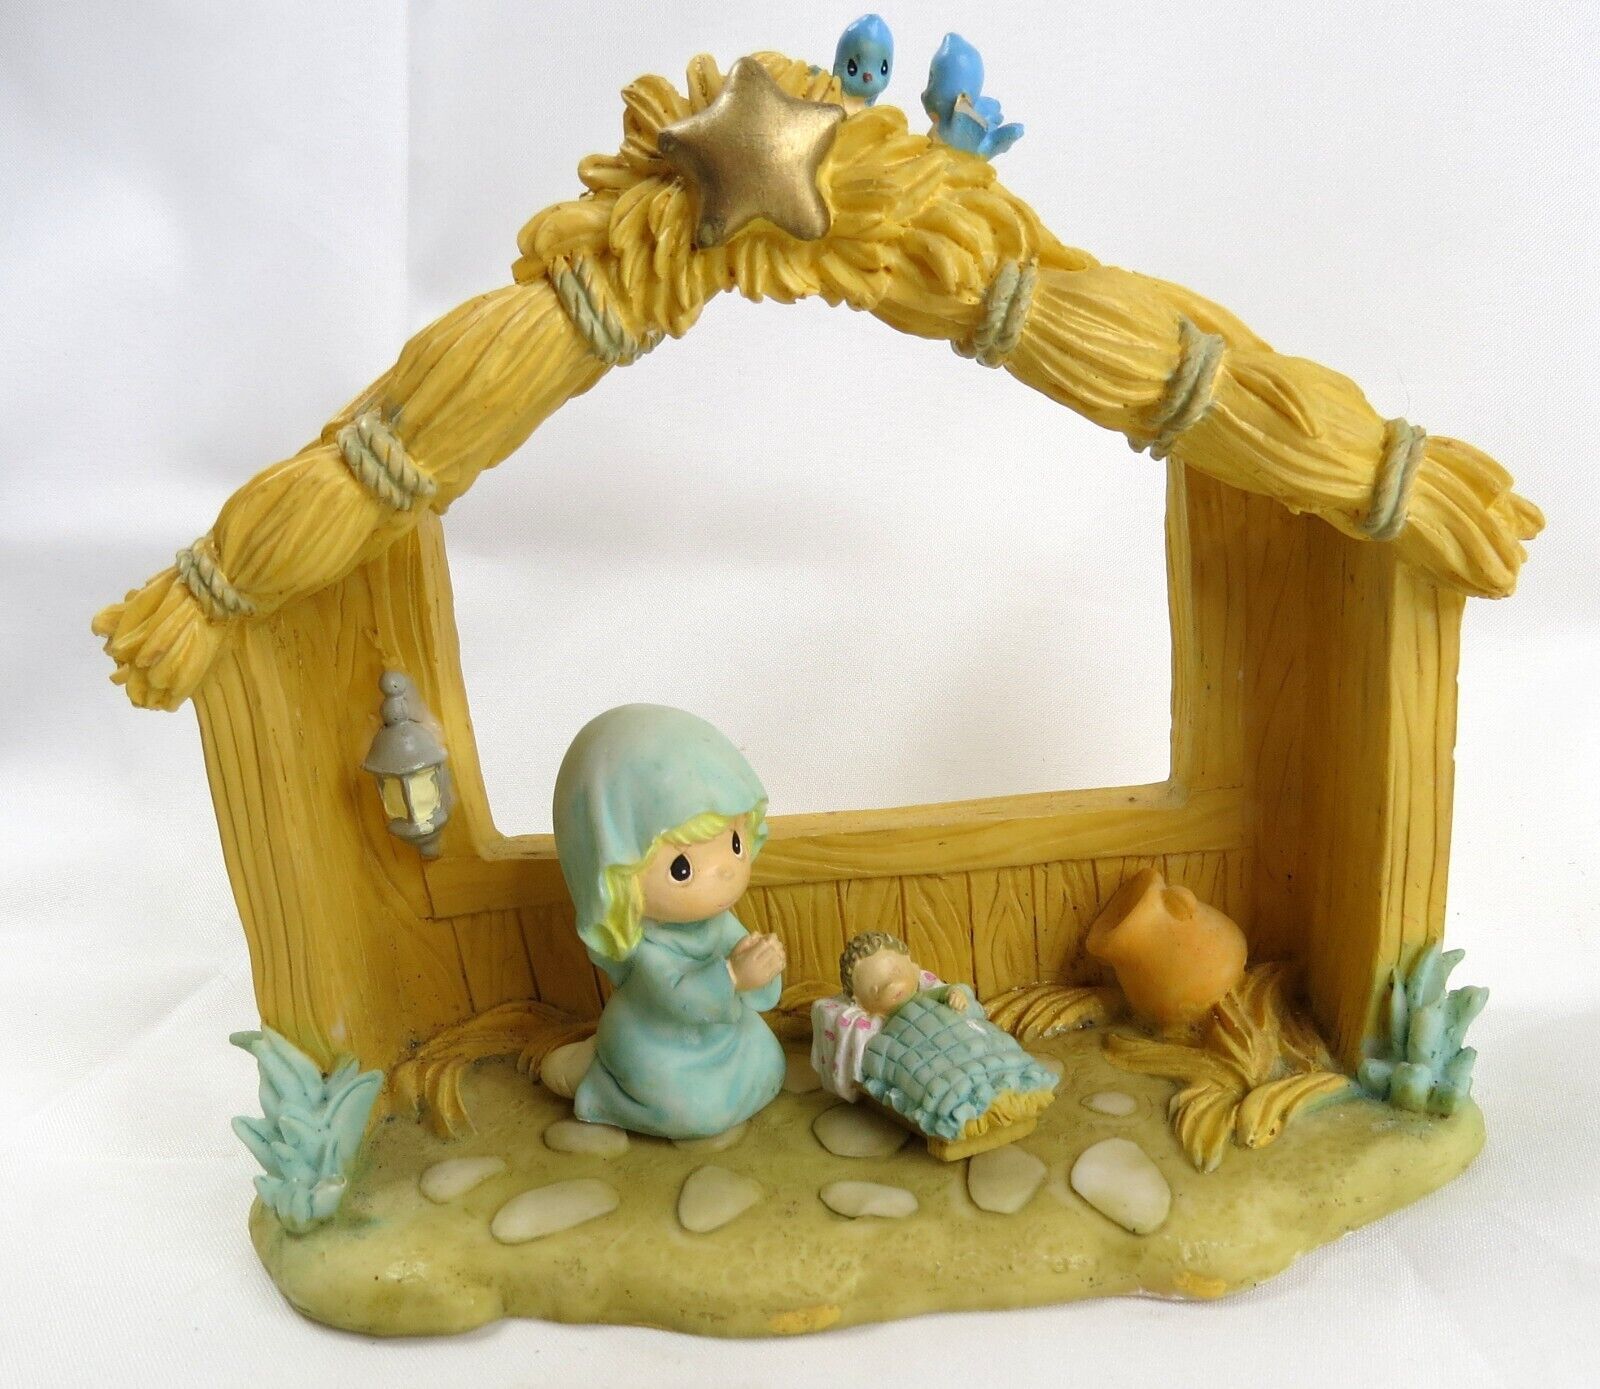 2001 Precious Moments Nativity Figurine With Mary and Baby Jesus - $17.10